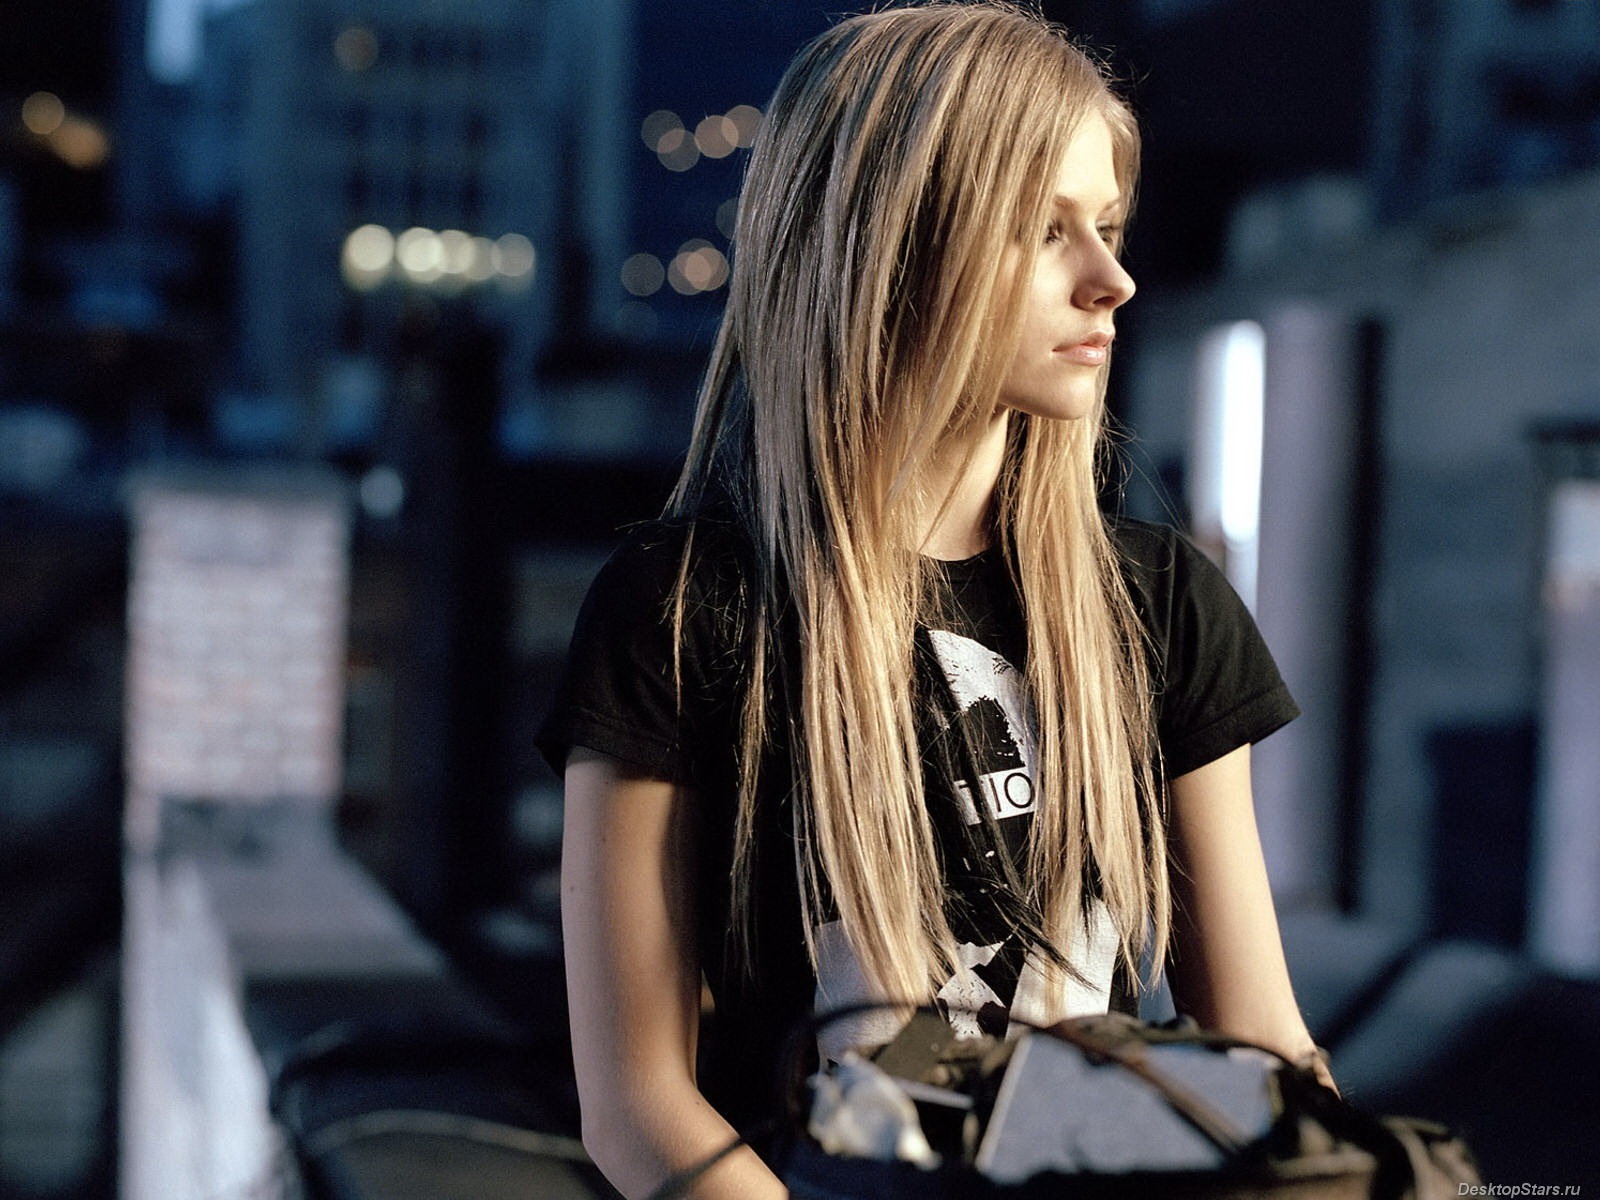 Avril Lavigne #005 - 1600x1200 Wallpapers Pictures Photos Images